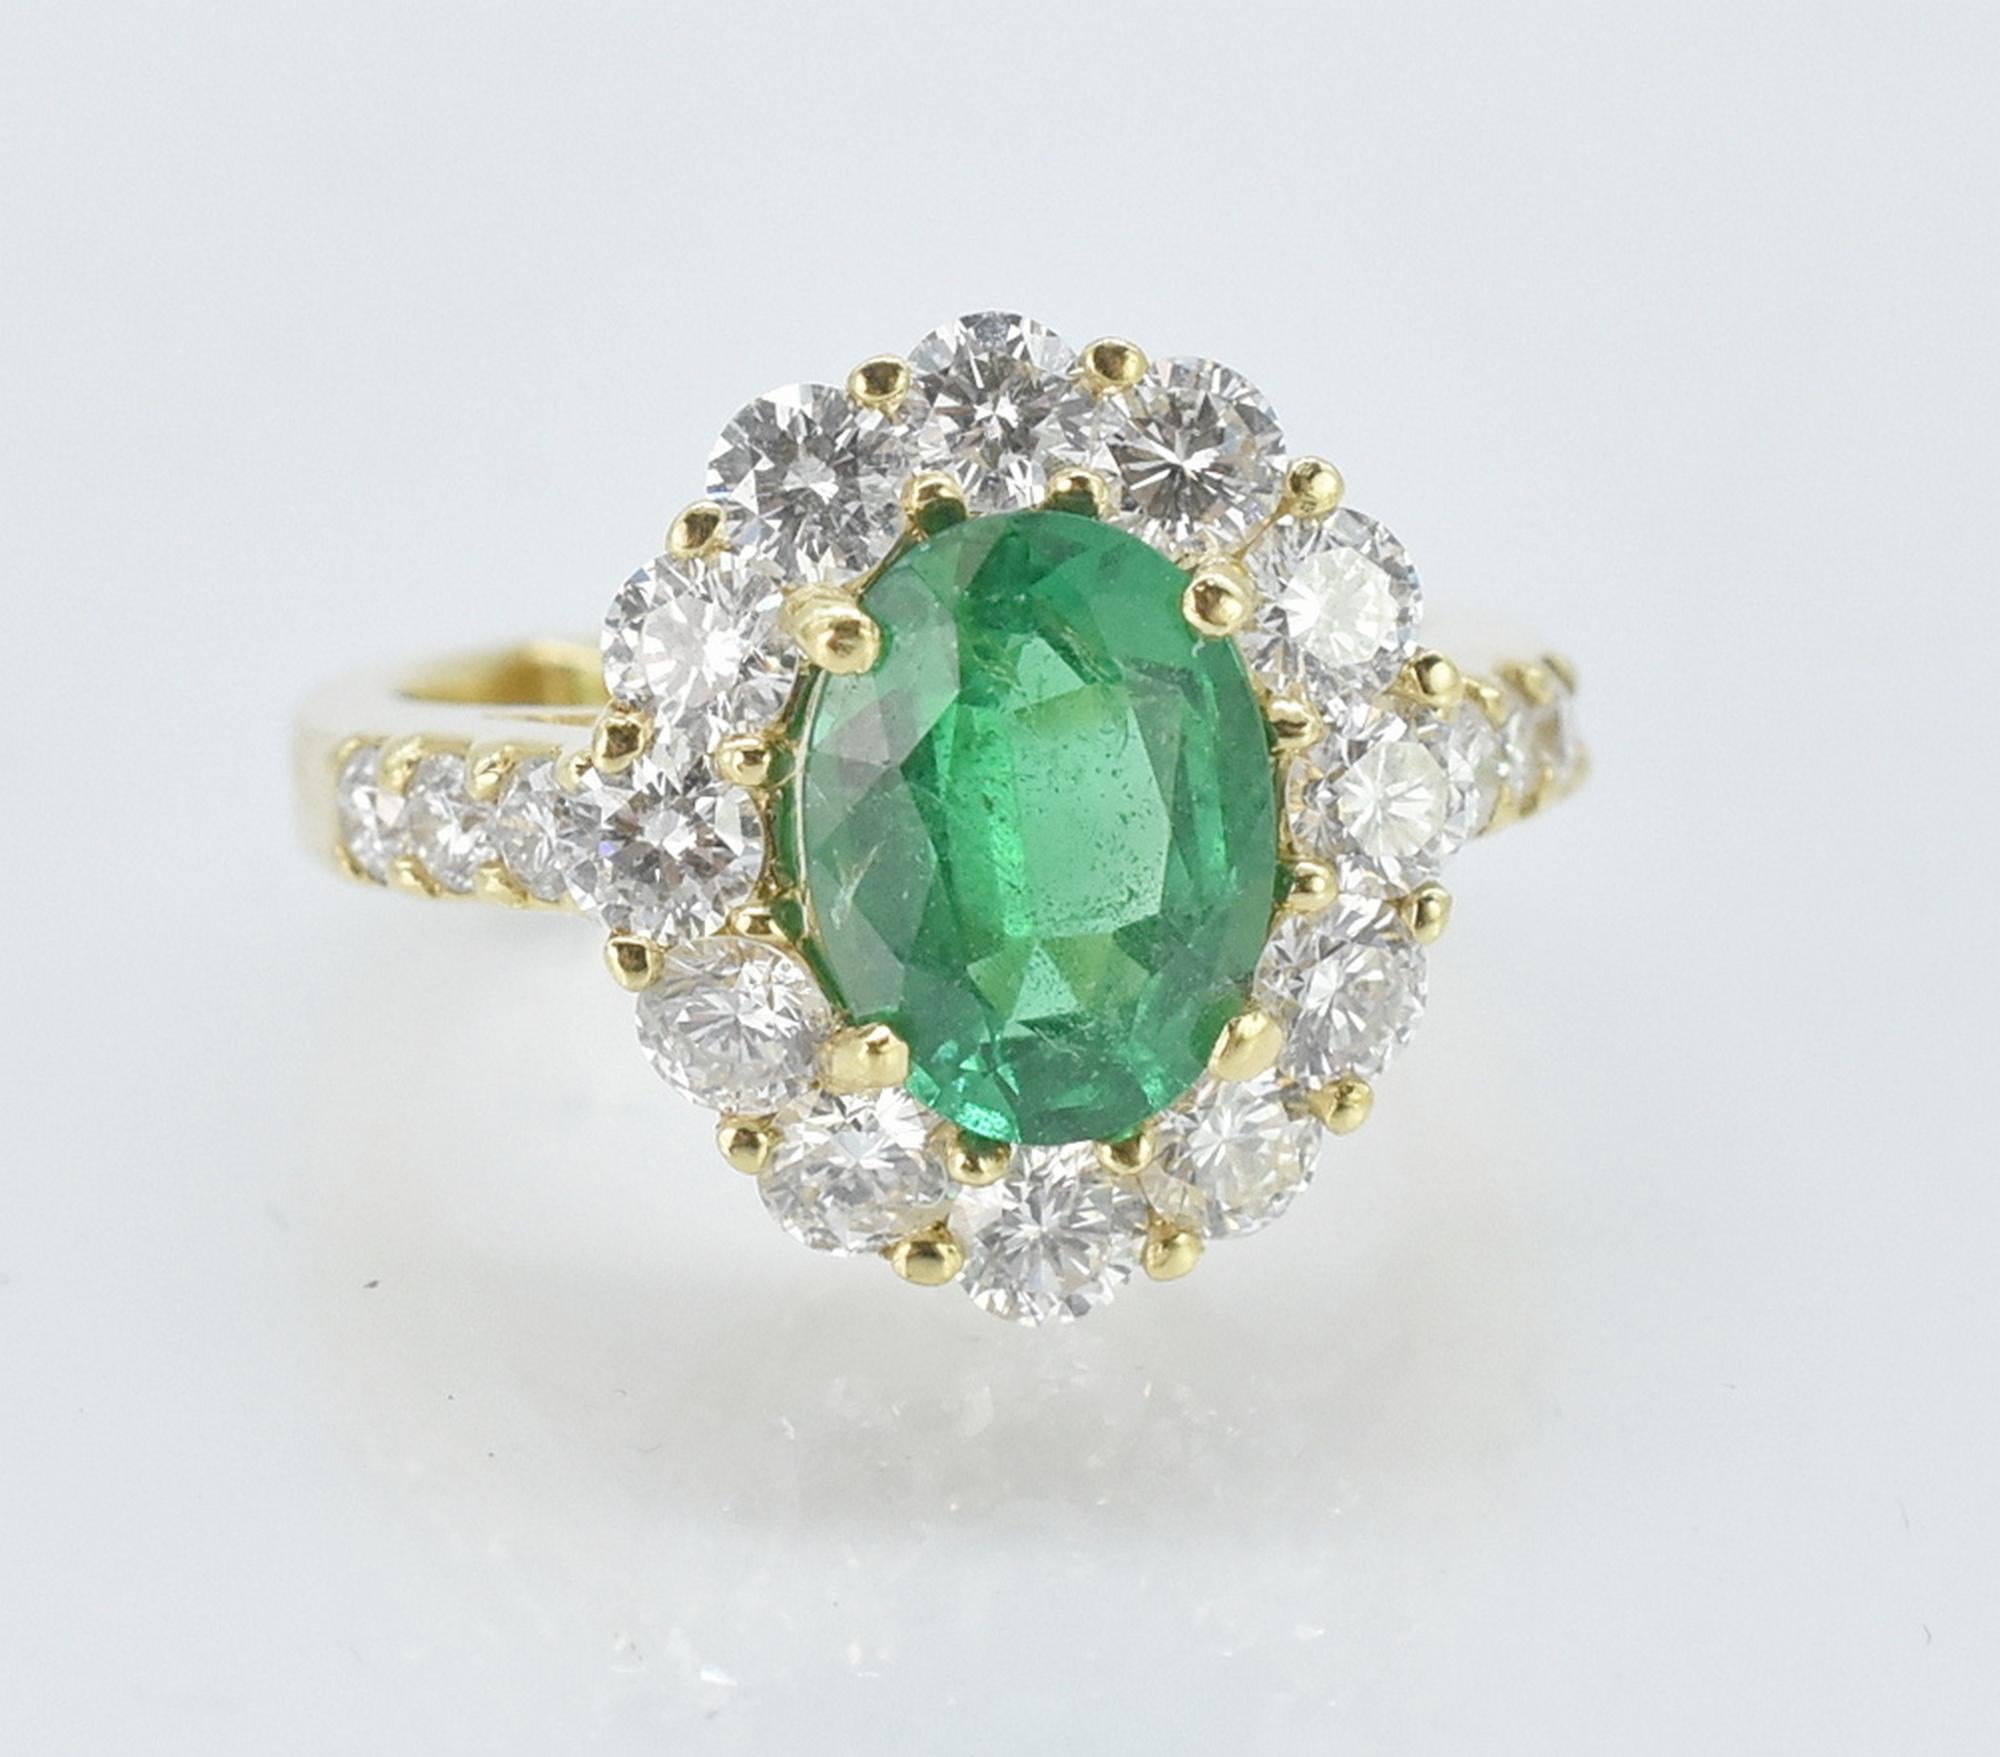 18k oval emerald and diamond ring, size 4 1/2. 1.93ct oval emerald & 2.00ct diamond ring, emerald is GIA certified, diamonds f-g color, vs-2 clarity, 18k yellow gold, size 4 1/2, total weight 8.2 grams.